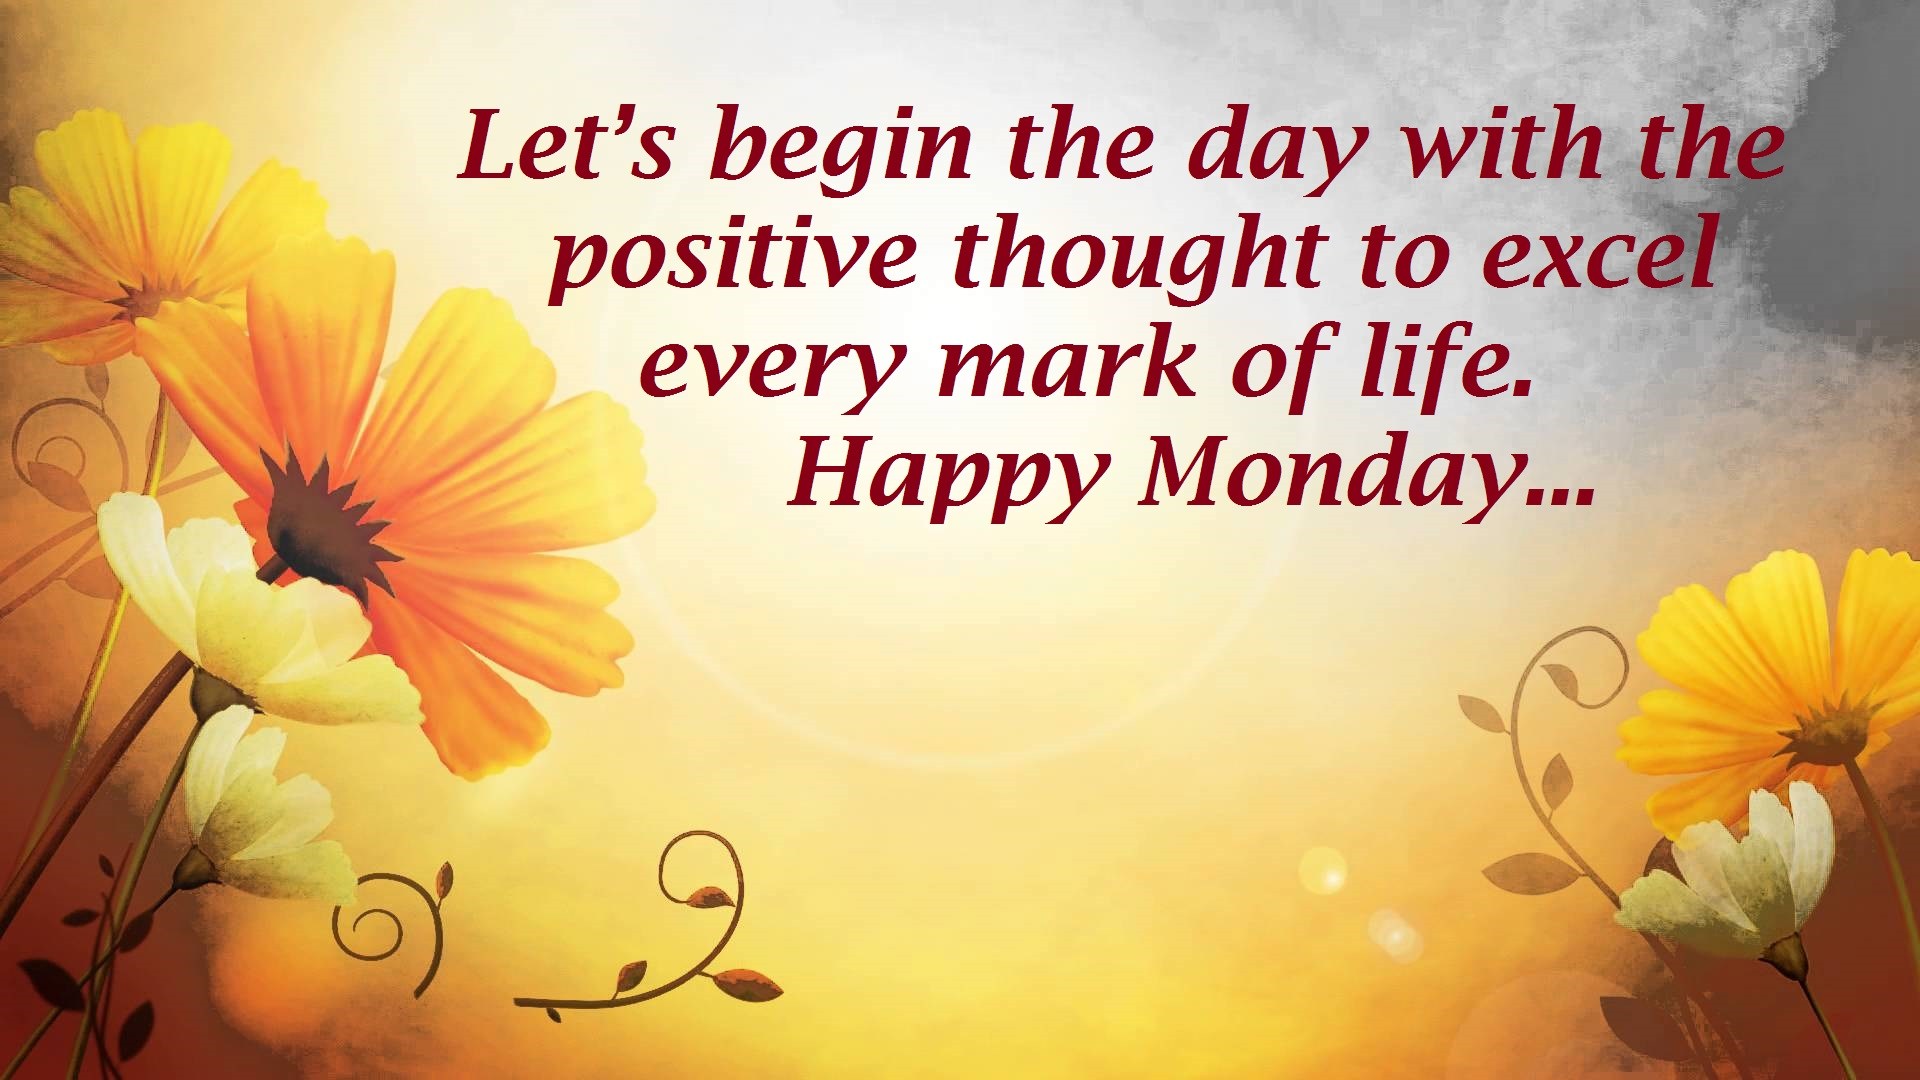 Lovely Happy Monday Wishes & Messages Images - Good Morning Wishes Hd , HD Wallpaper & Backgrounds